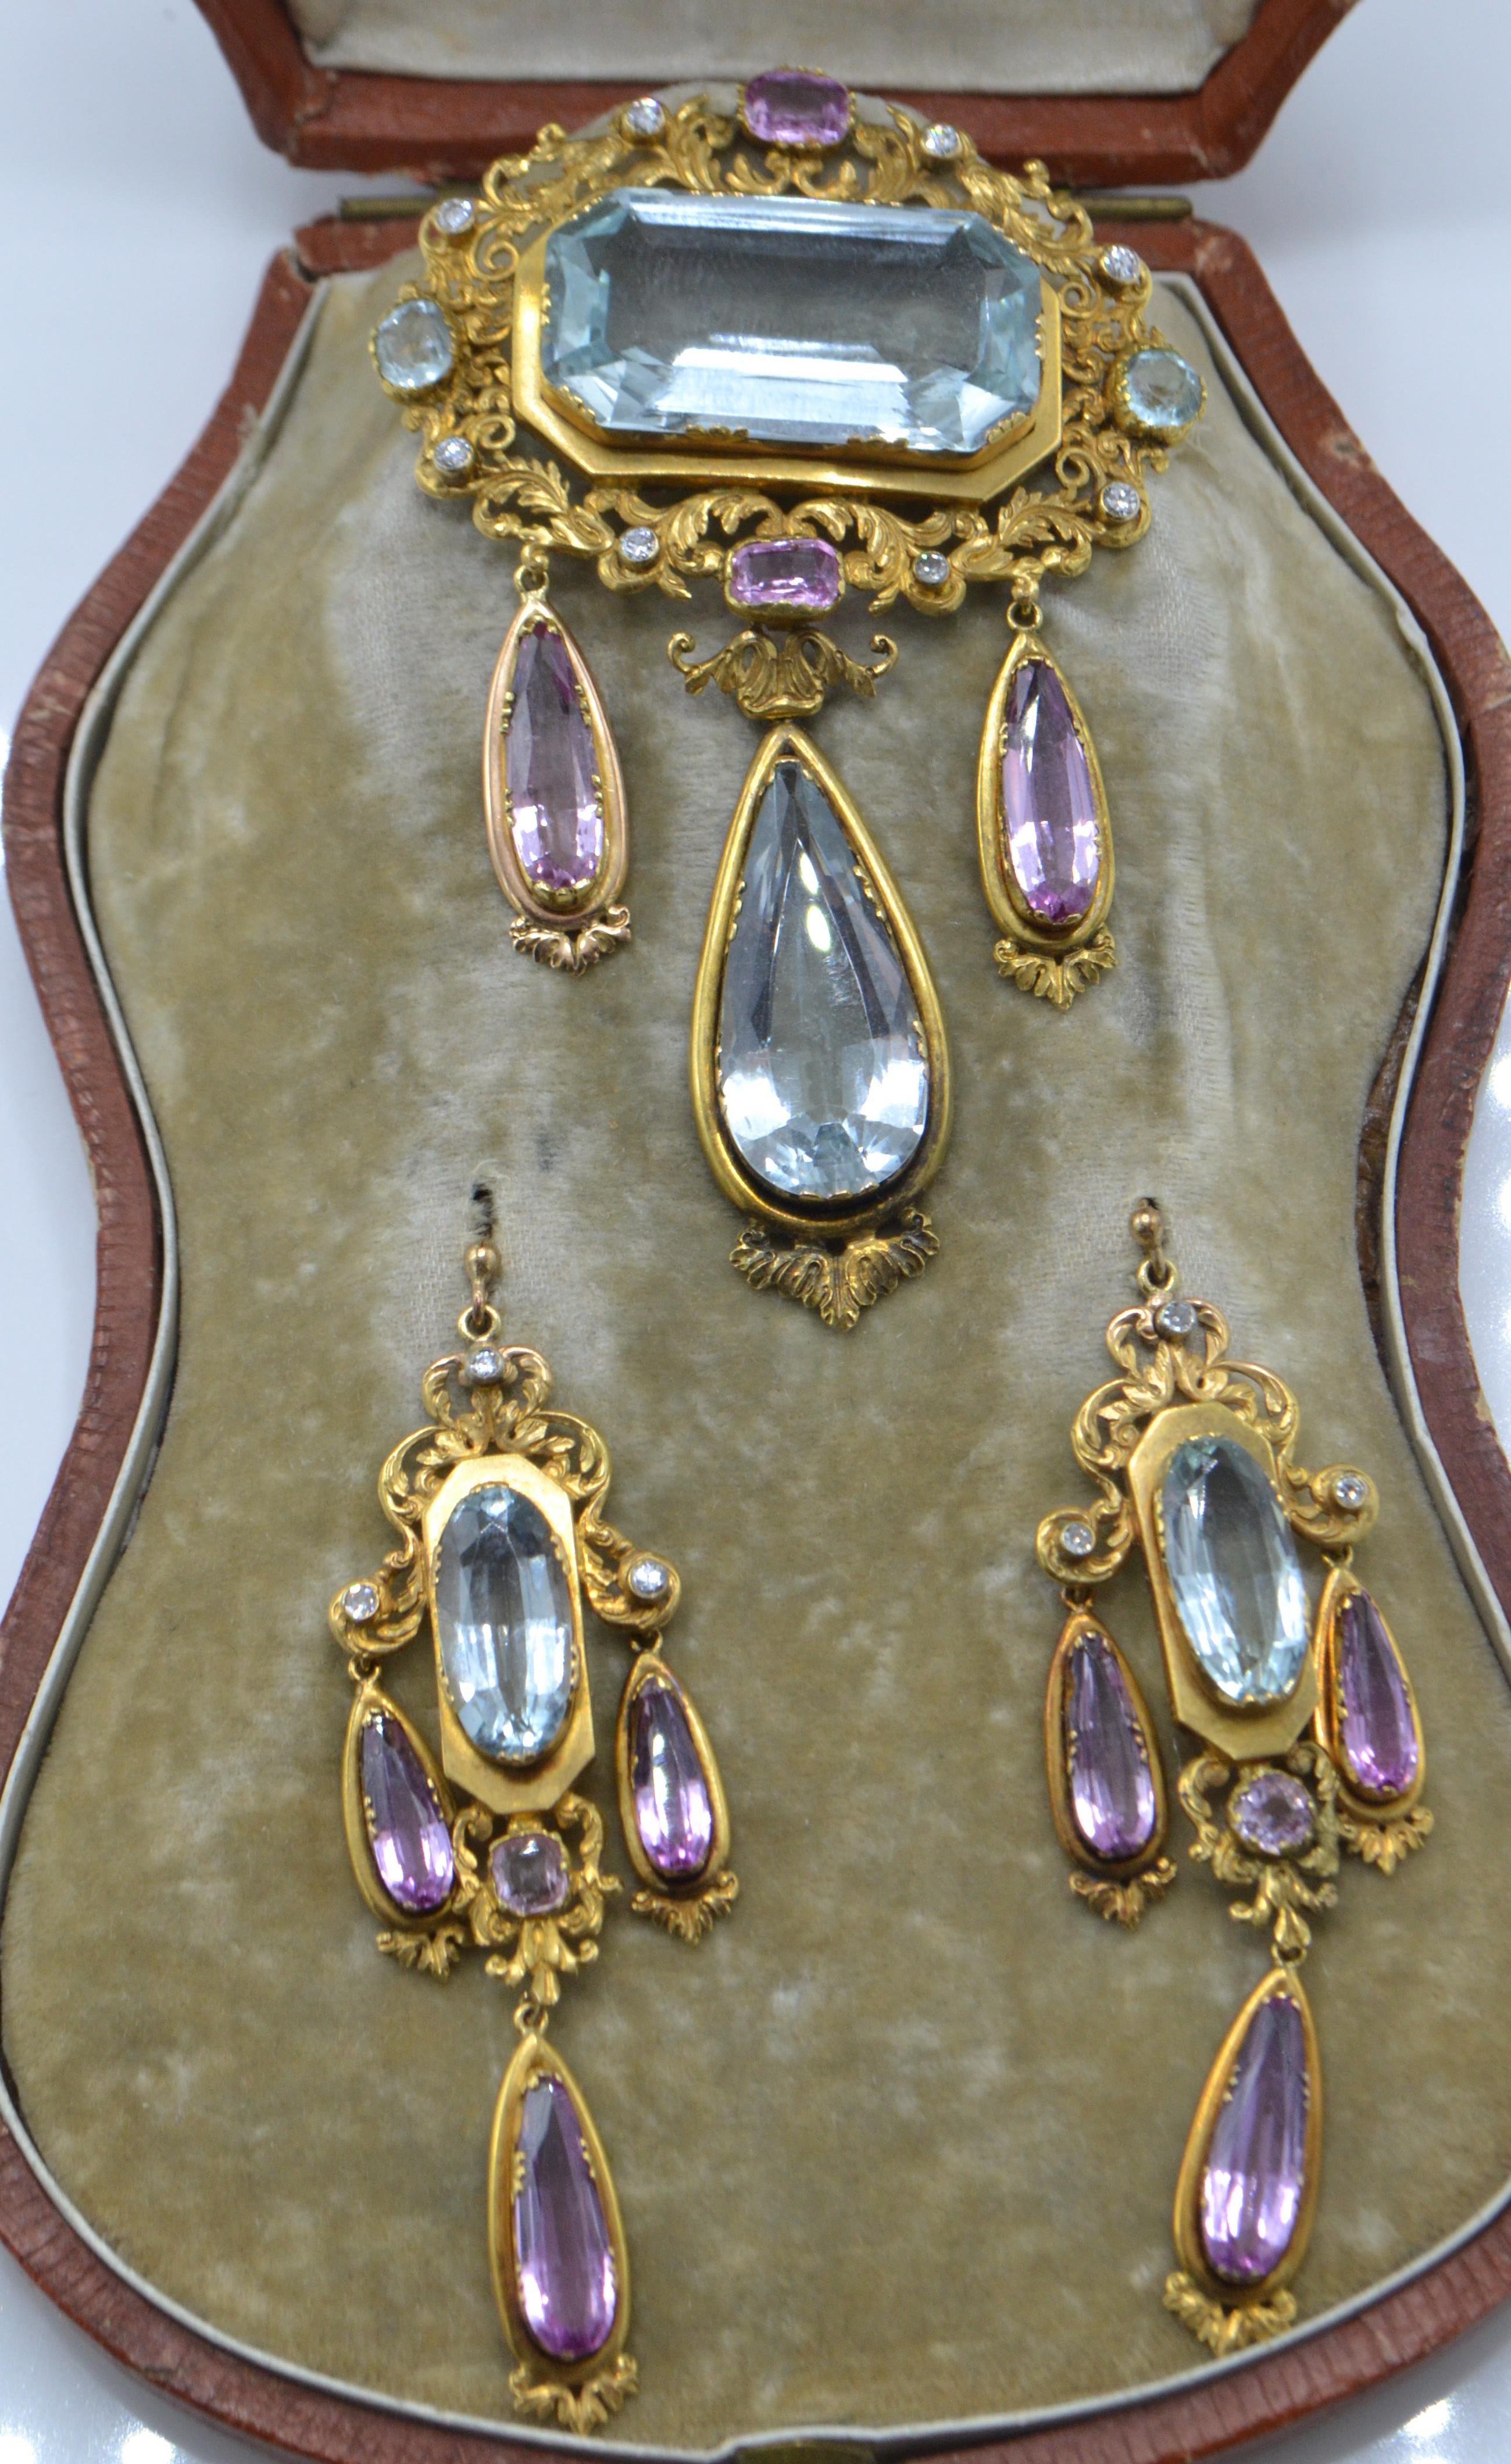 A cased 19th century gold, aquamarine, pink topaz and diamond brooch and earring suite. - Image 8 of 9